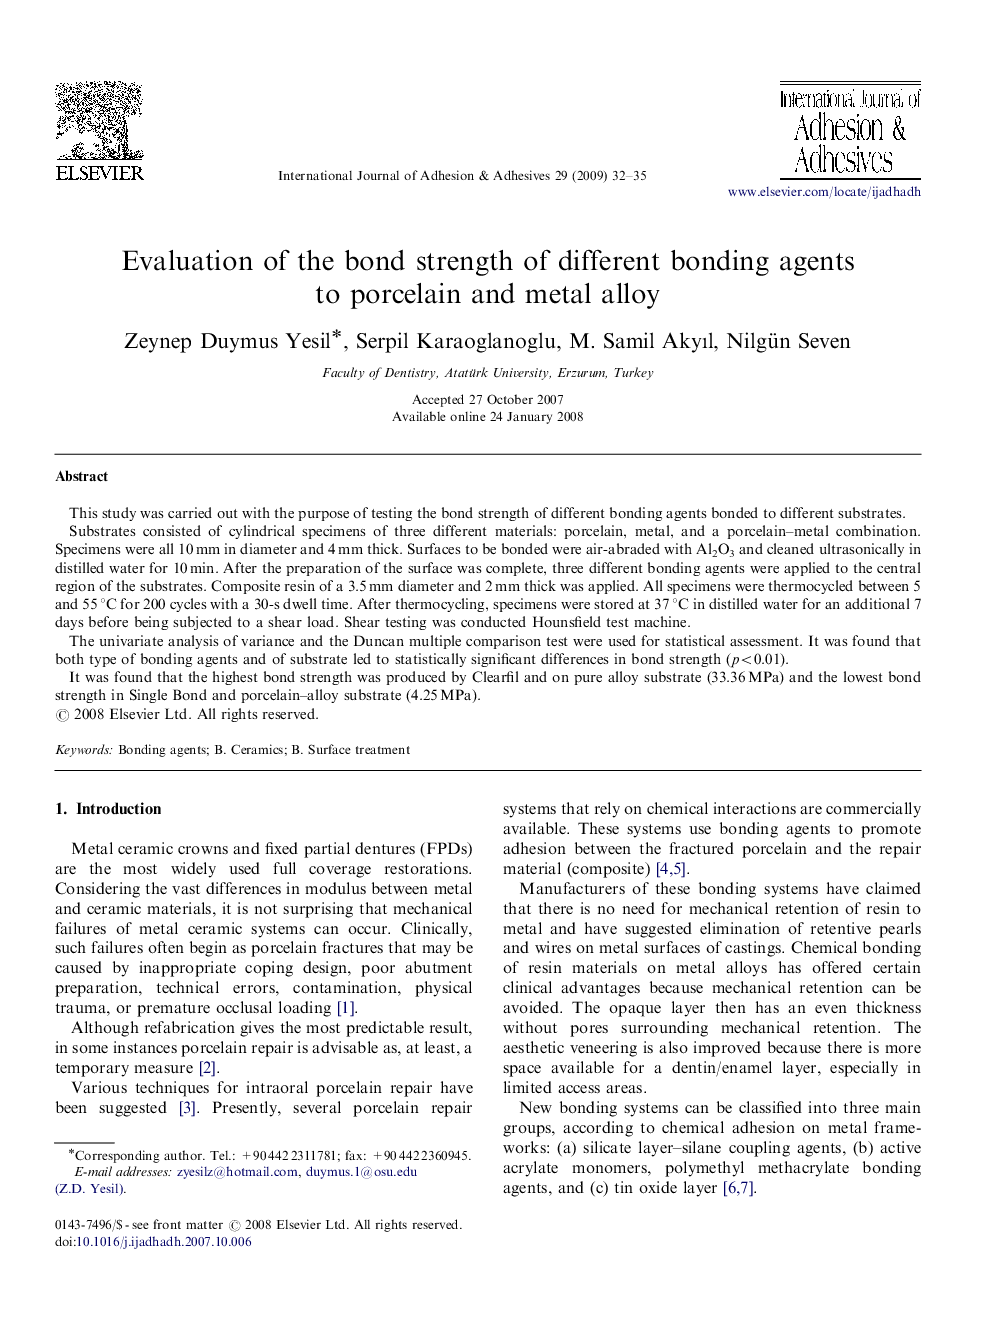 Evaluation of the bond strength of different bonding agents to porcelain and metal alloy